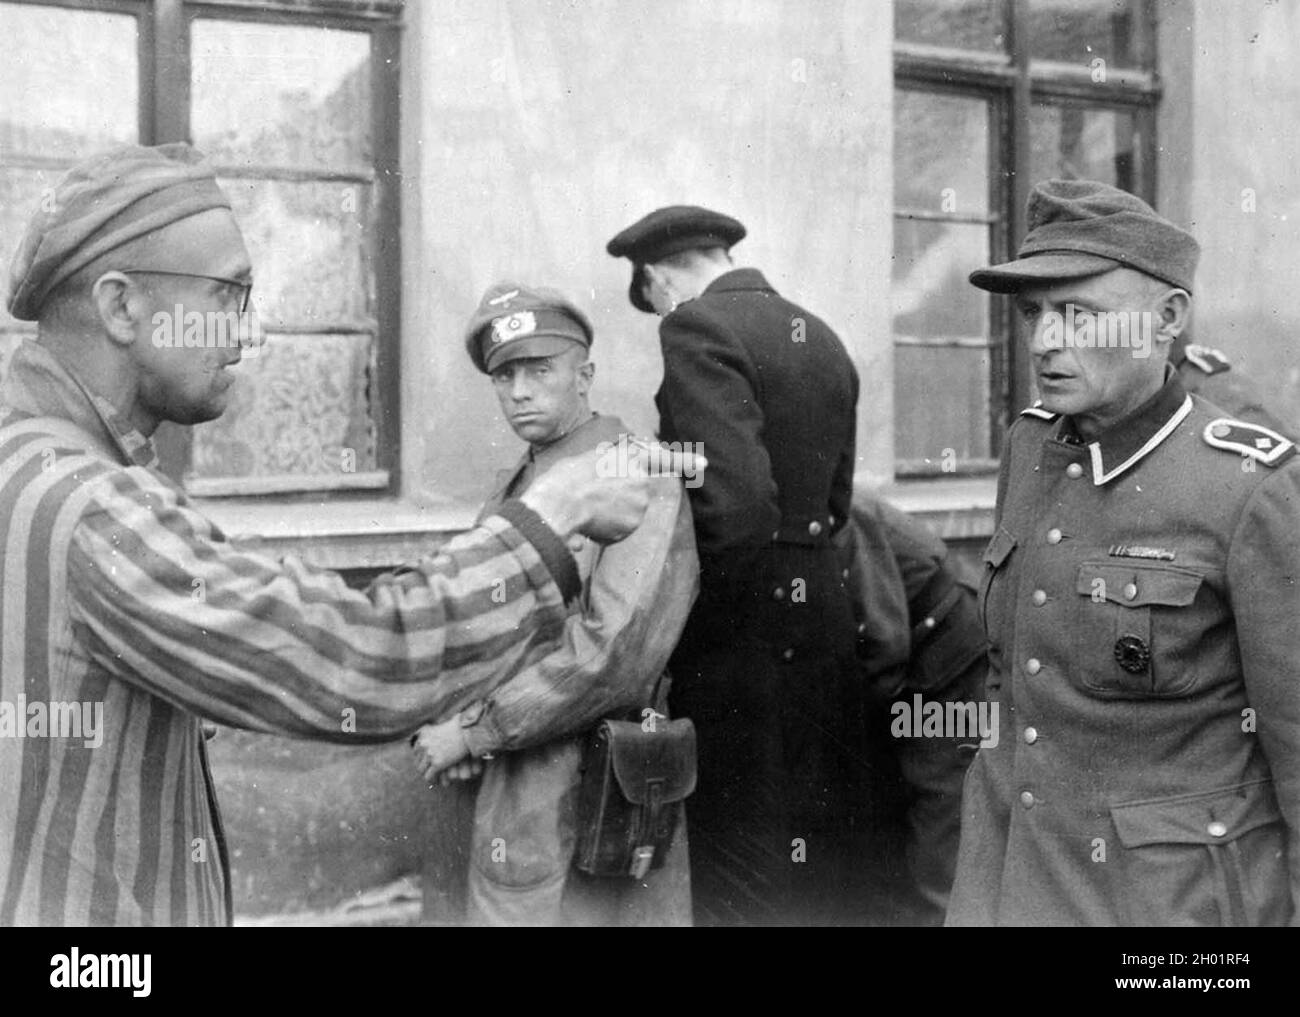 A Russian survivor, liberated by the 3rd Armored Division of the U.S. First Army, identifies a former camp guard who brutally beat prisoners on April 14, 1945, at the Buchenwald concentration camp in Thuringia, Germany Stock Photo